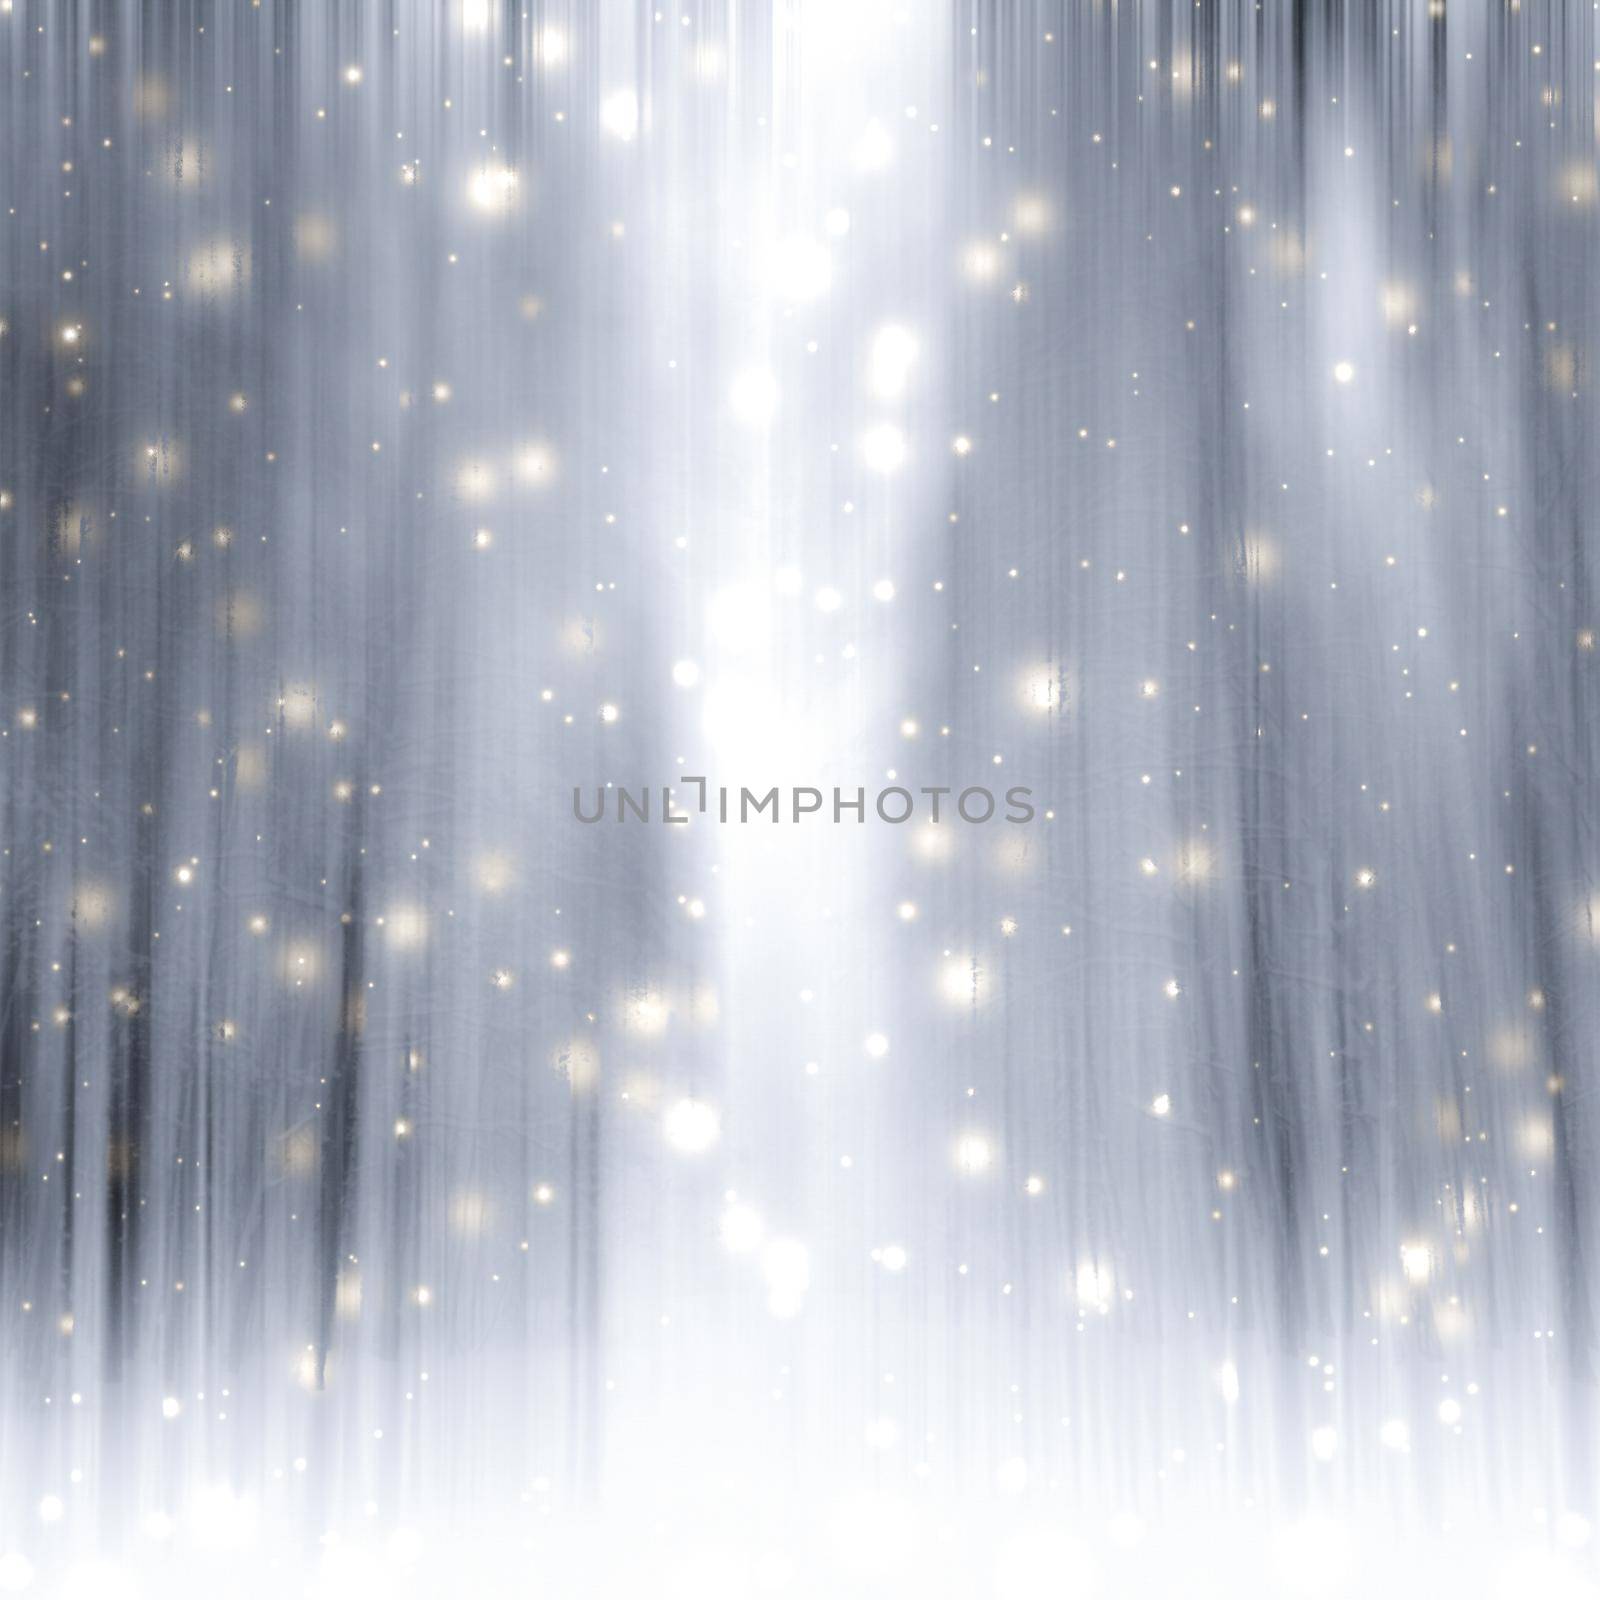 Holidays branding, fantasy and fairy tale concept - Winter season abstract nature art print and Christmas landscape holiday background, snowy magical forest as luxury brand postcard design backdrop